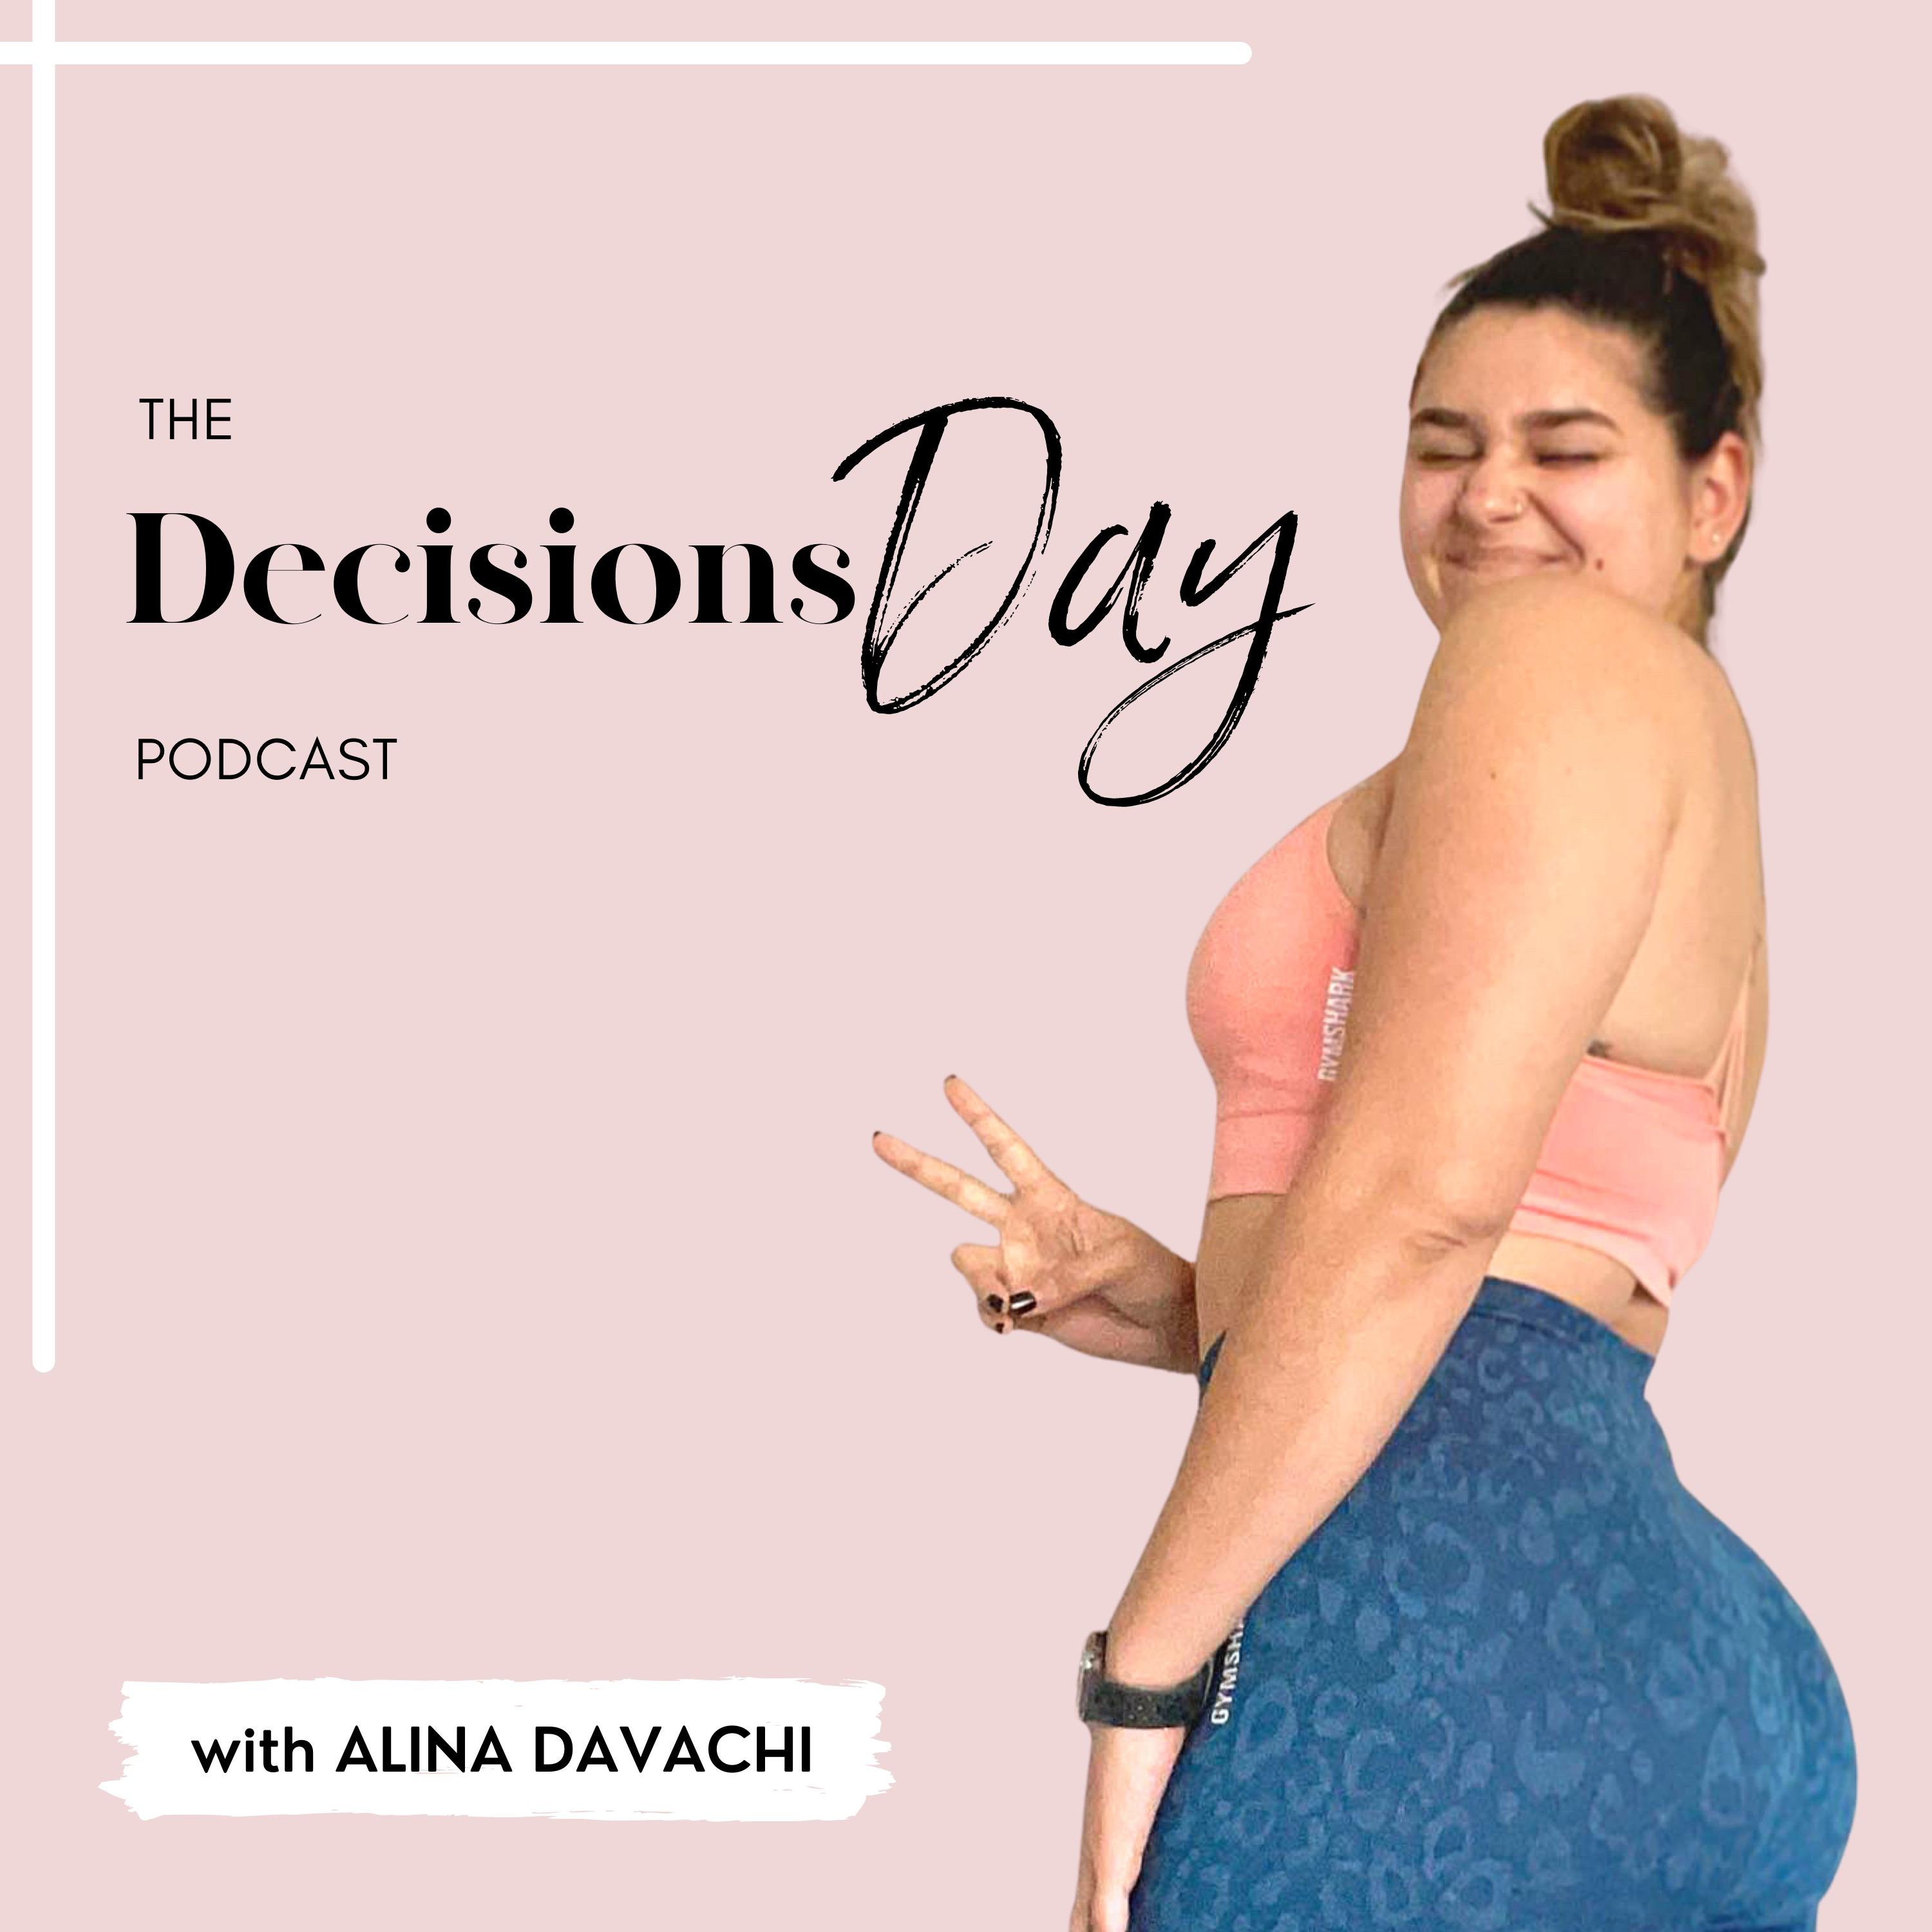 The Decisions Day Podcast